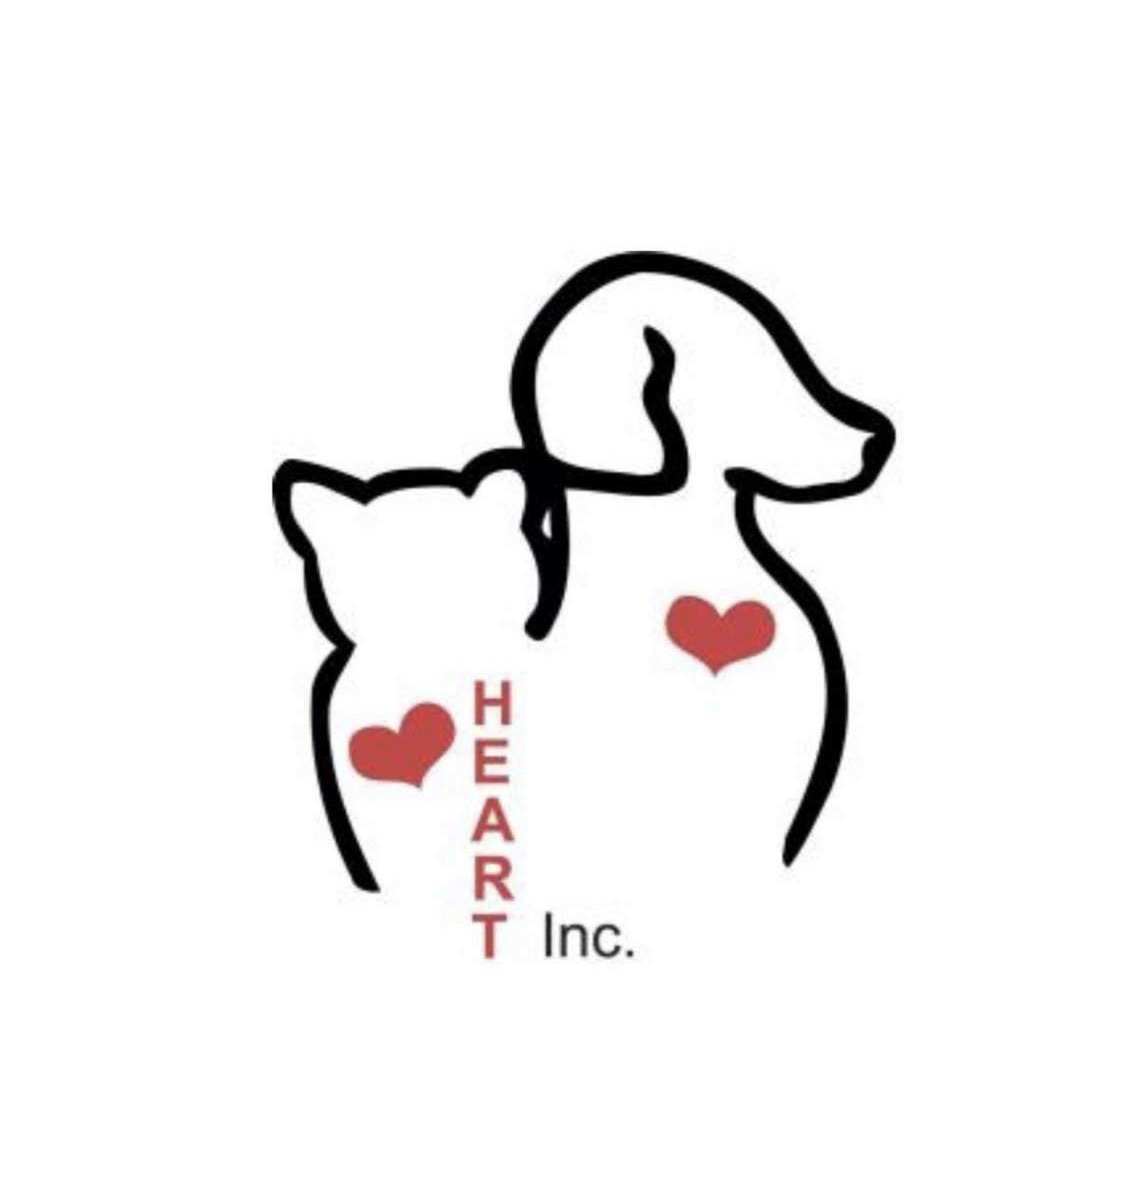 HEART Animal Rescue and Adoption Team, Inc.